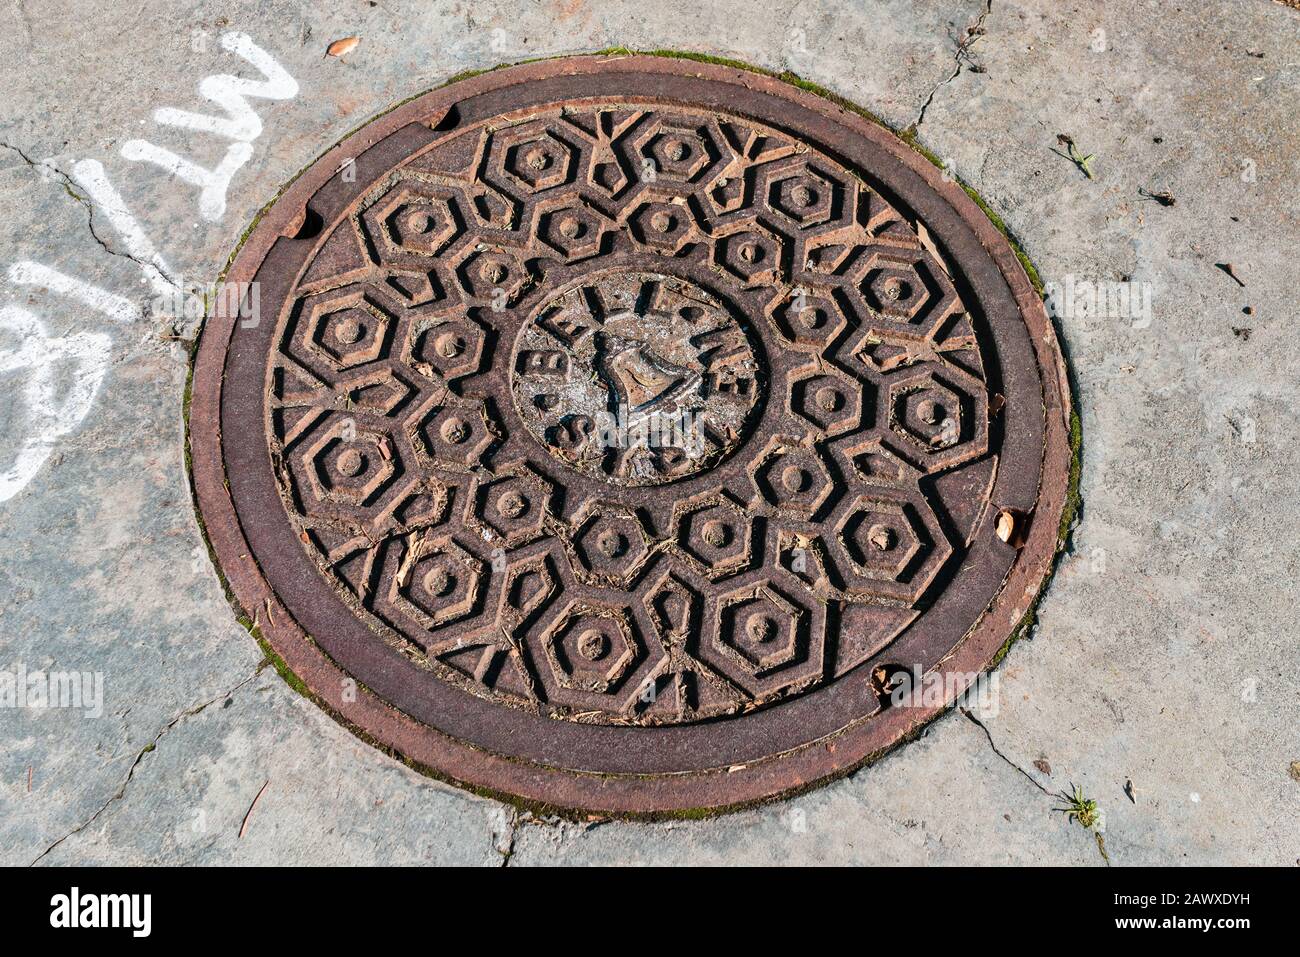 Jan 24, 2020 Sunnyvale - Close up of historic rusted Bell System manhole cover; the old landlines are owned by AT&T in California Stock Photo